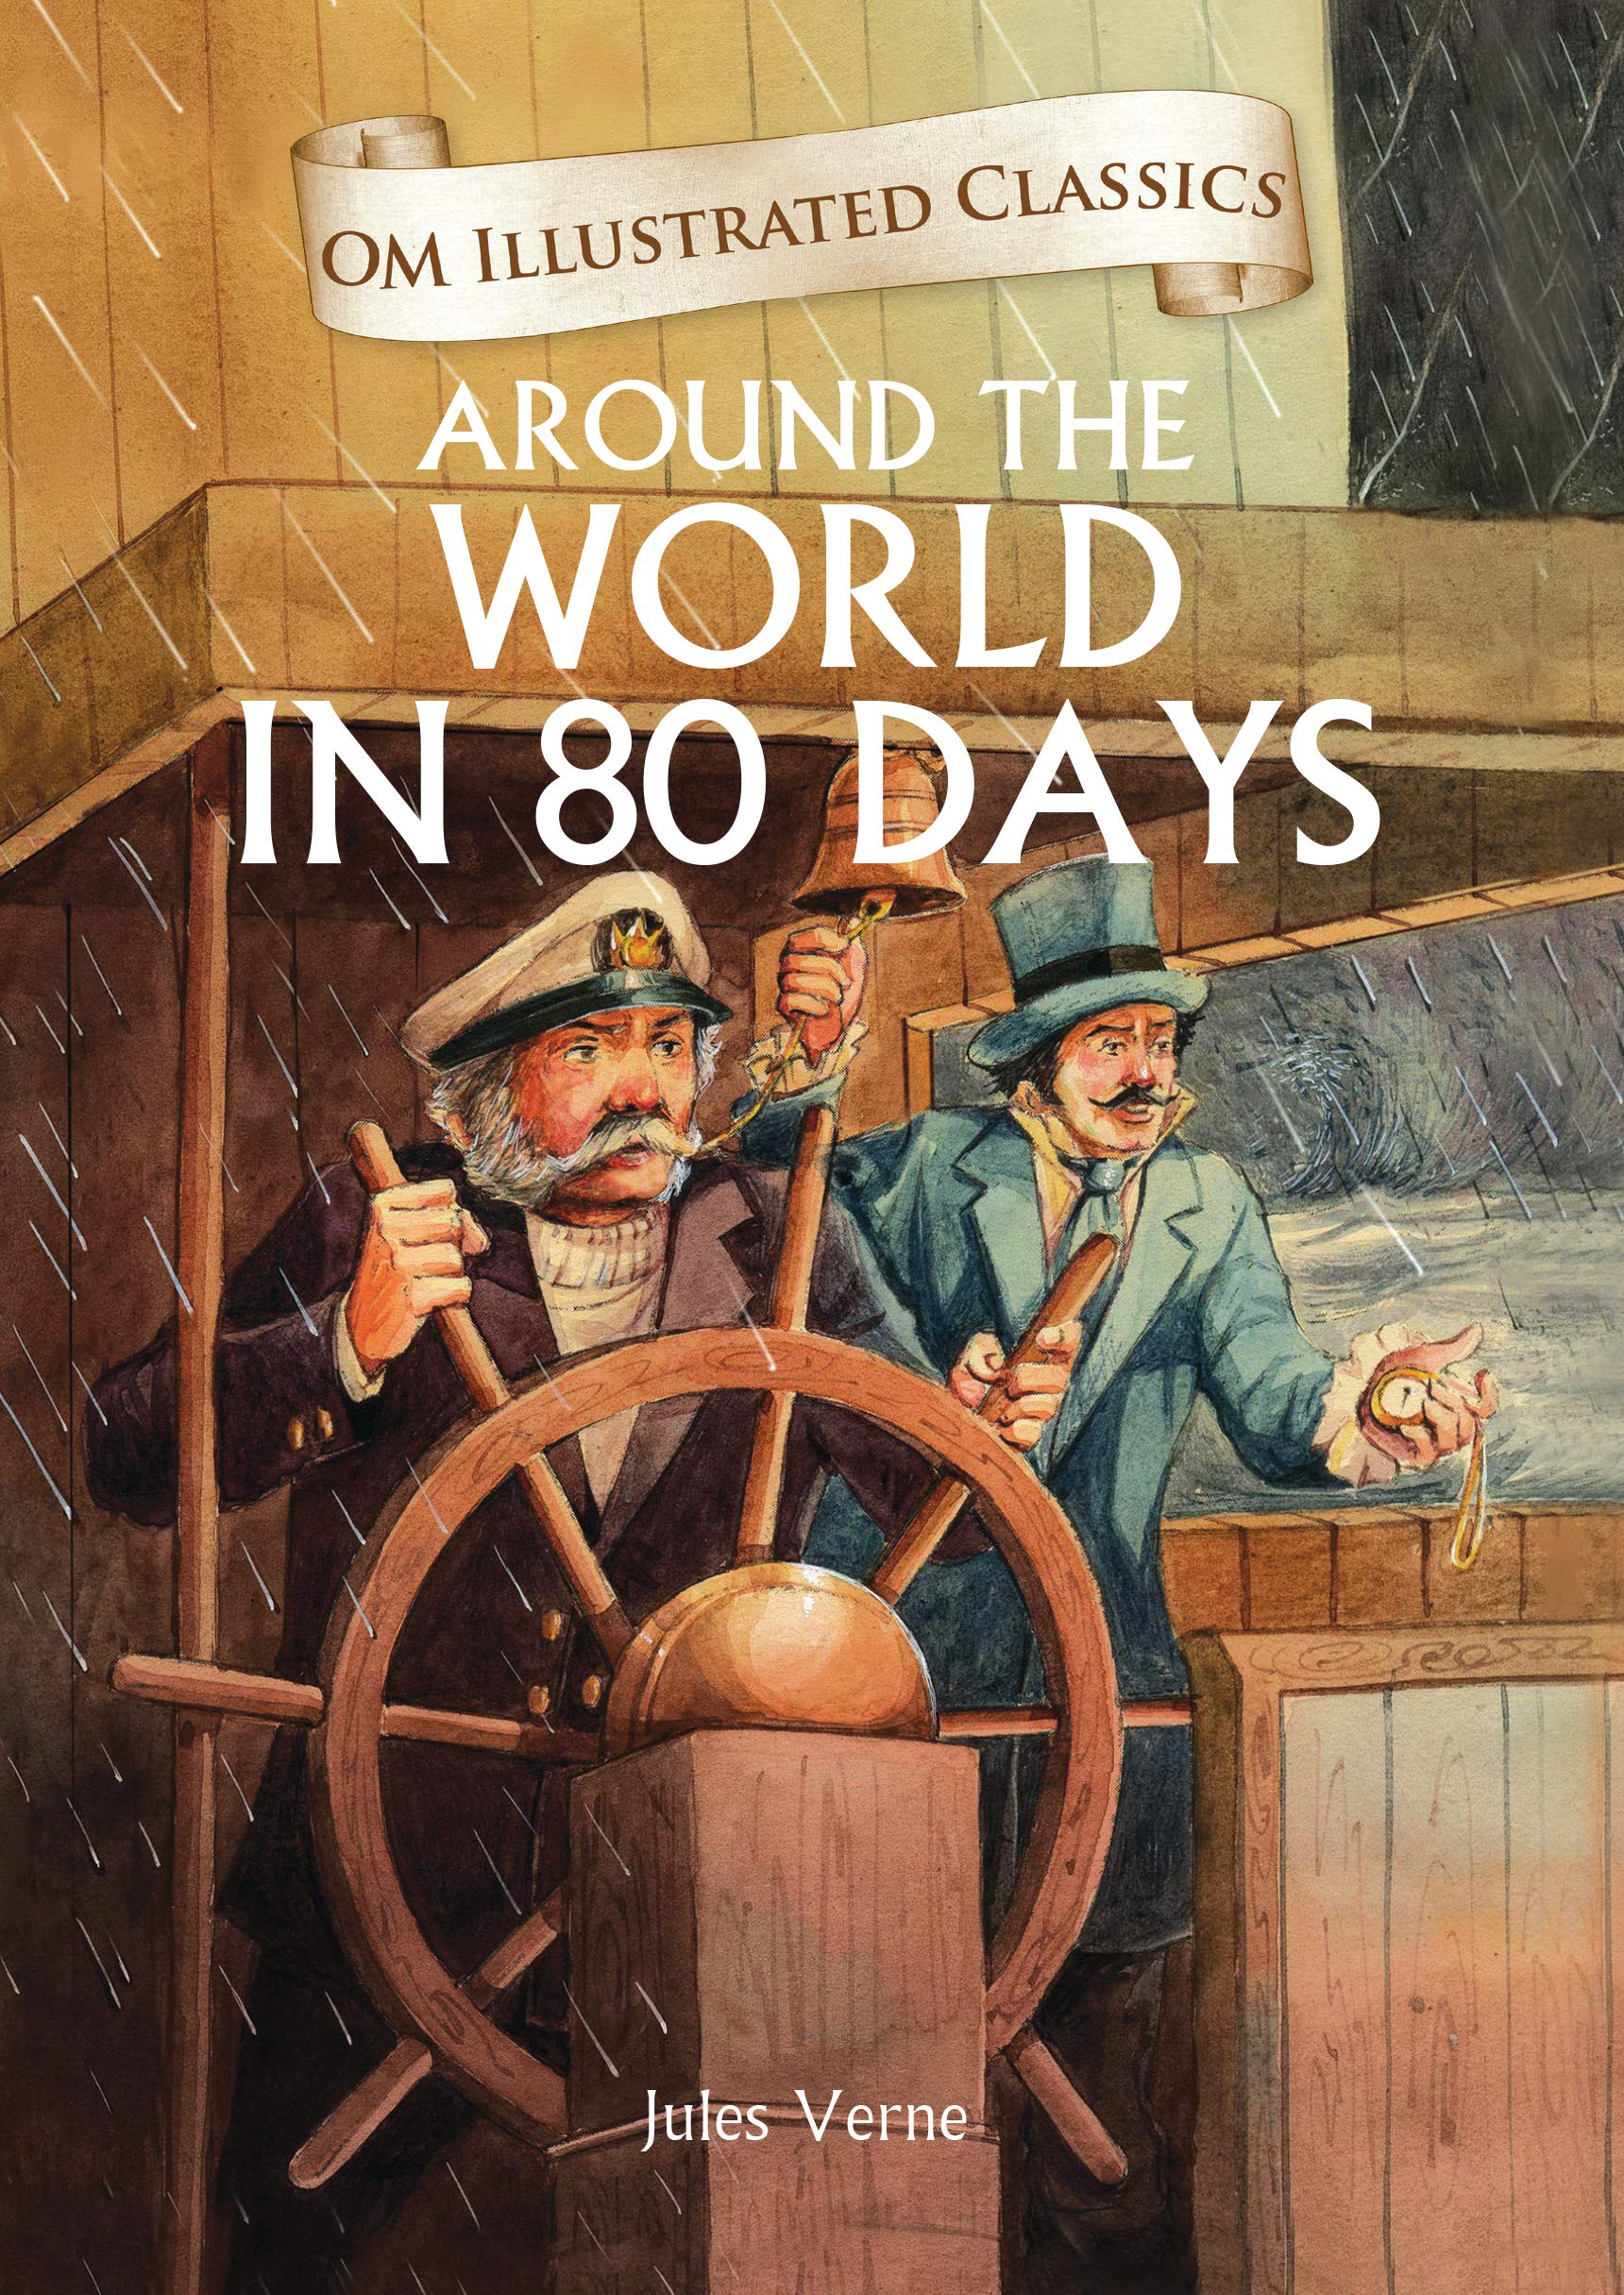 book review on the world in 80 days